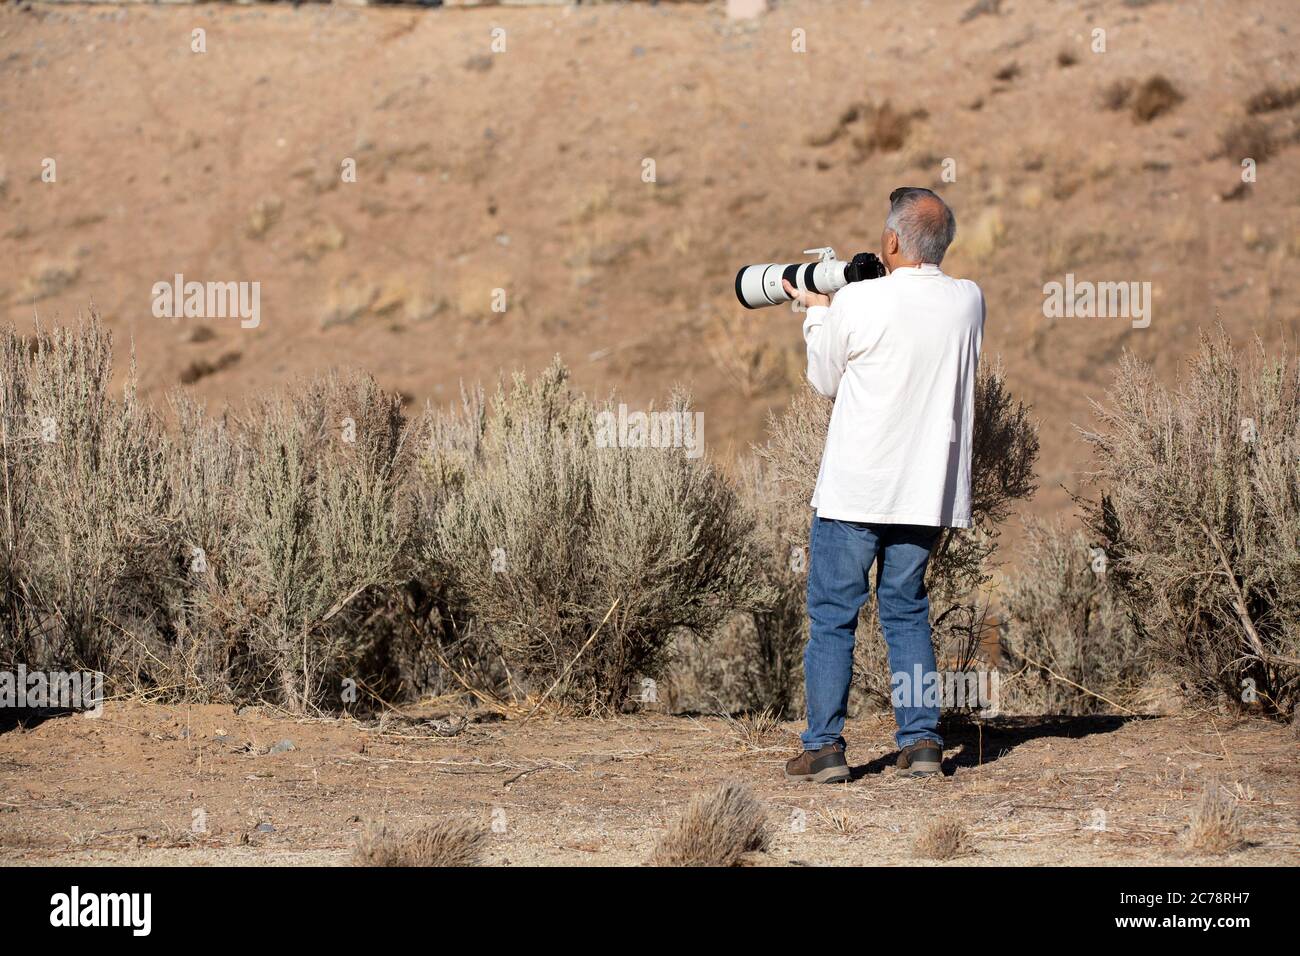 Older man holding a large camera with a white telephoto lens in the desert Stock Photo